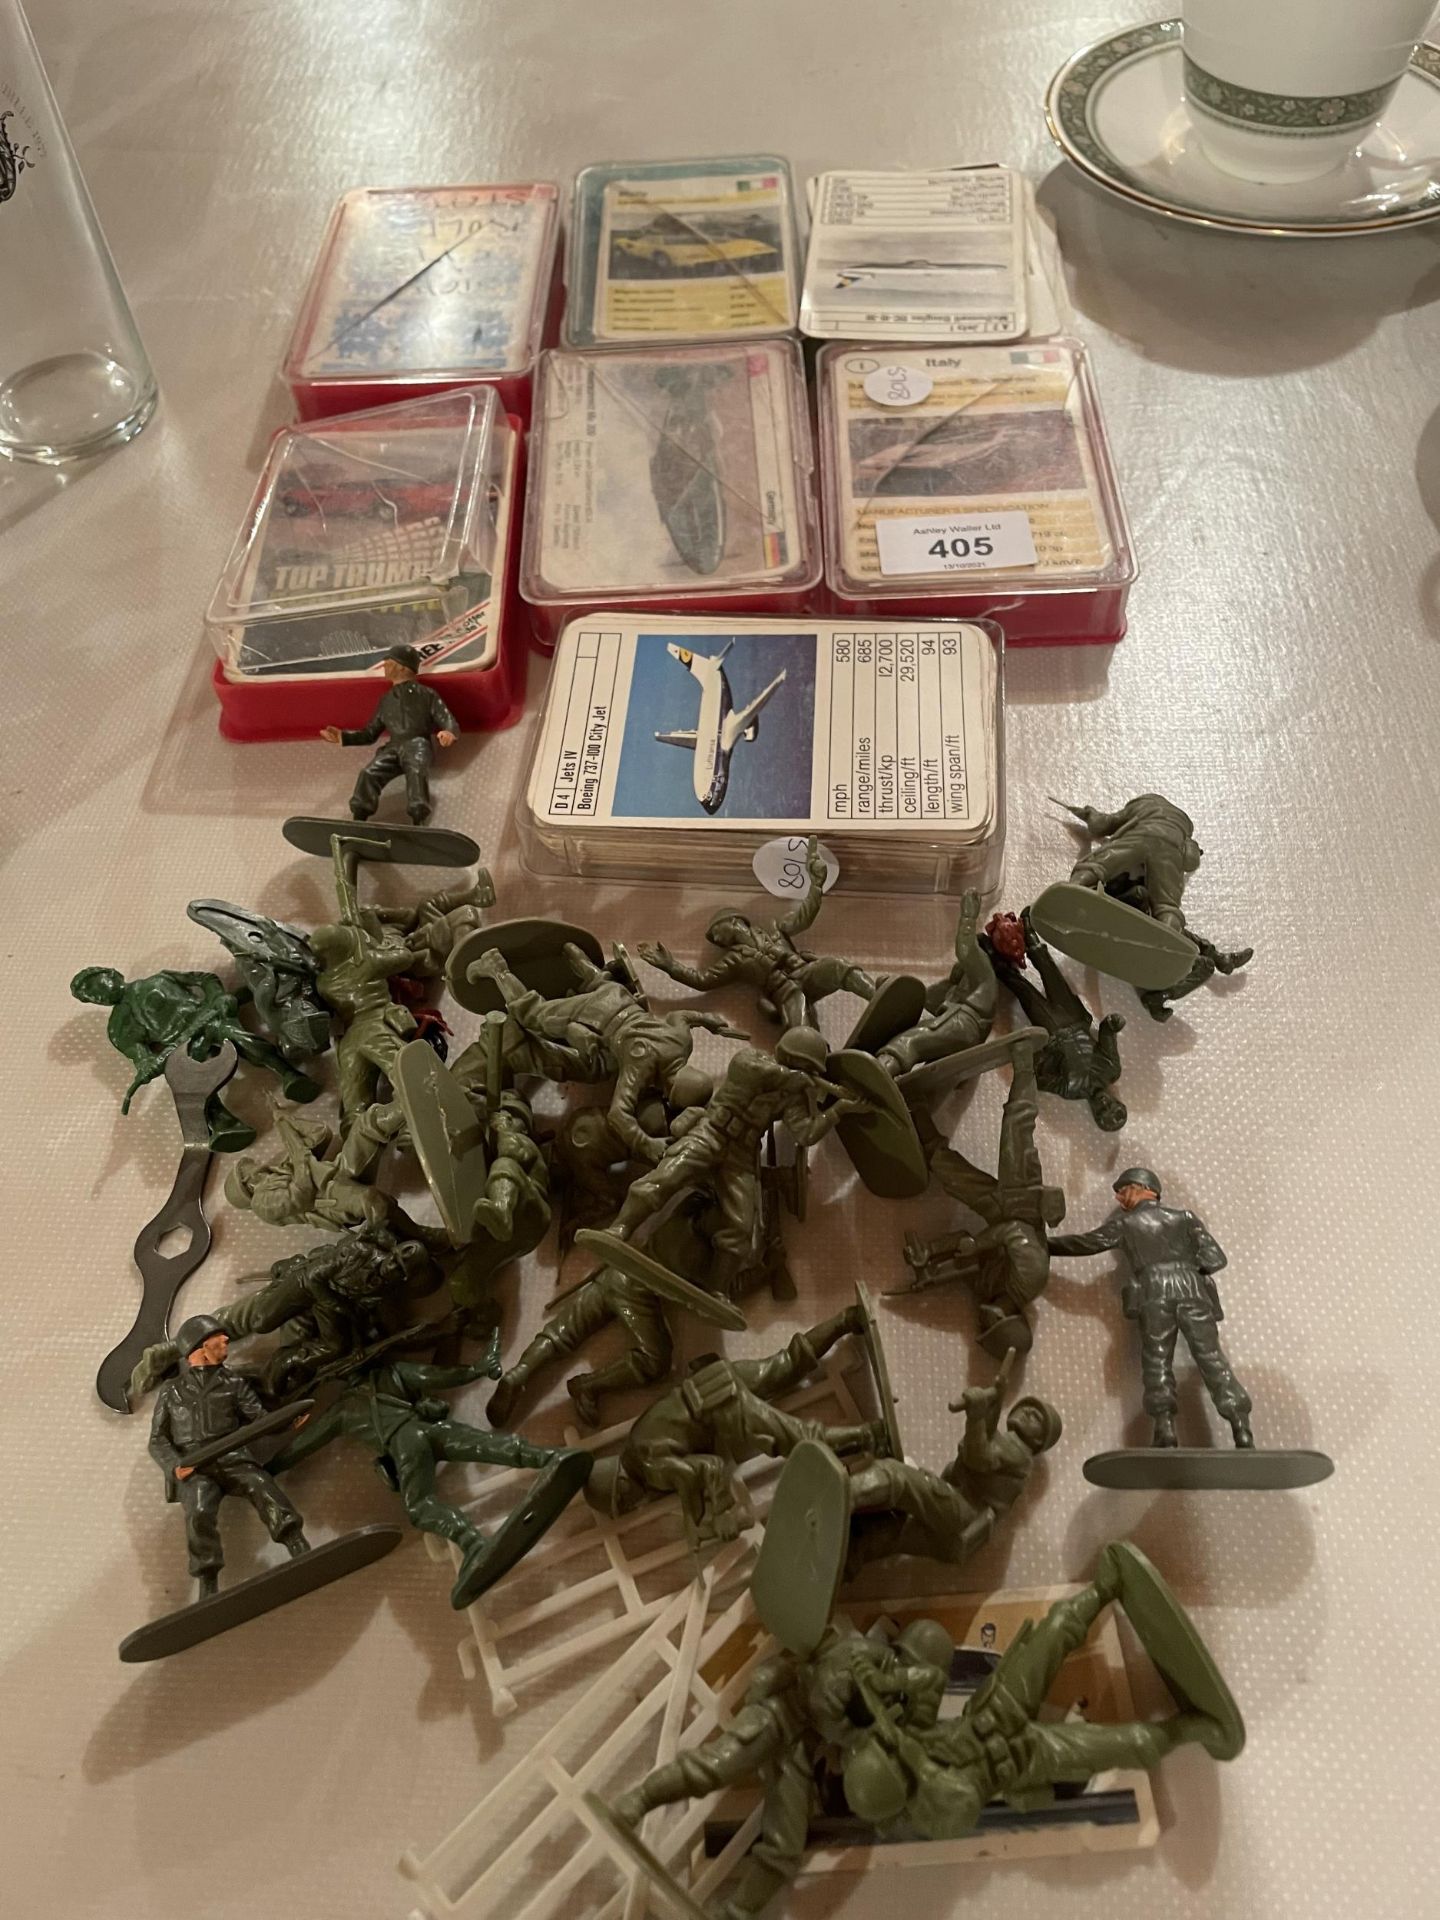 AN AMOUNT OF PLASTIC SOLDIERS, AND SIX TOP TRUMP CARD GAMES TO INCLUDE CARS AND PLANES